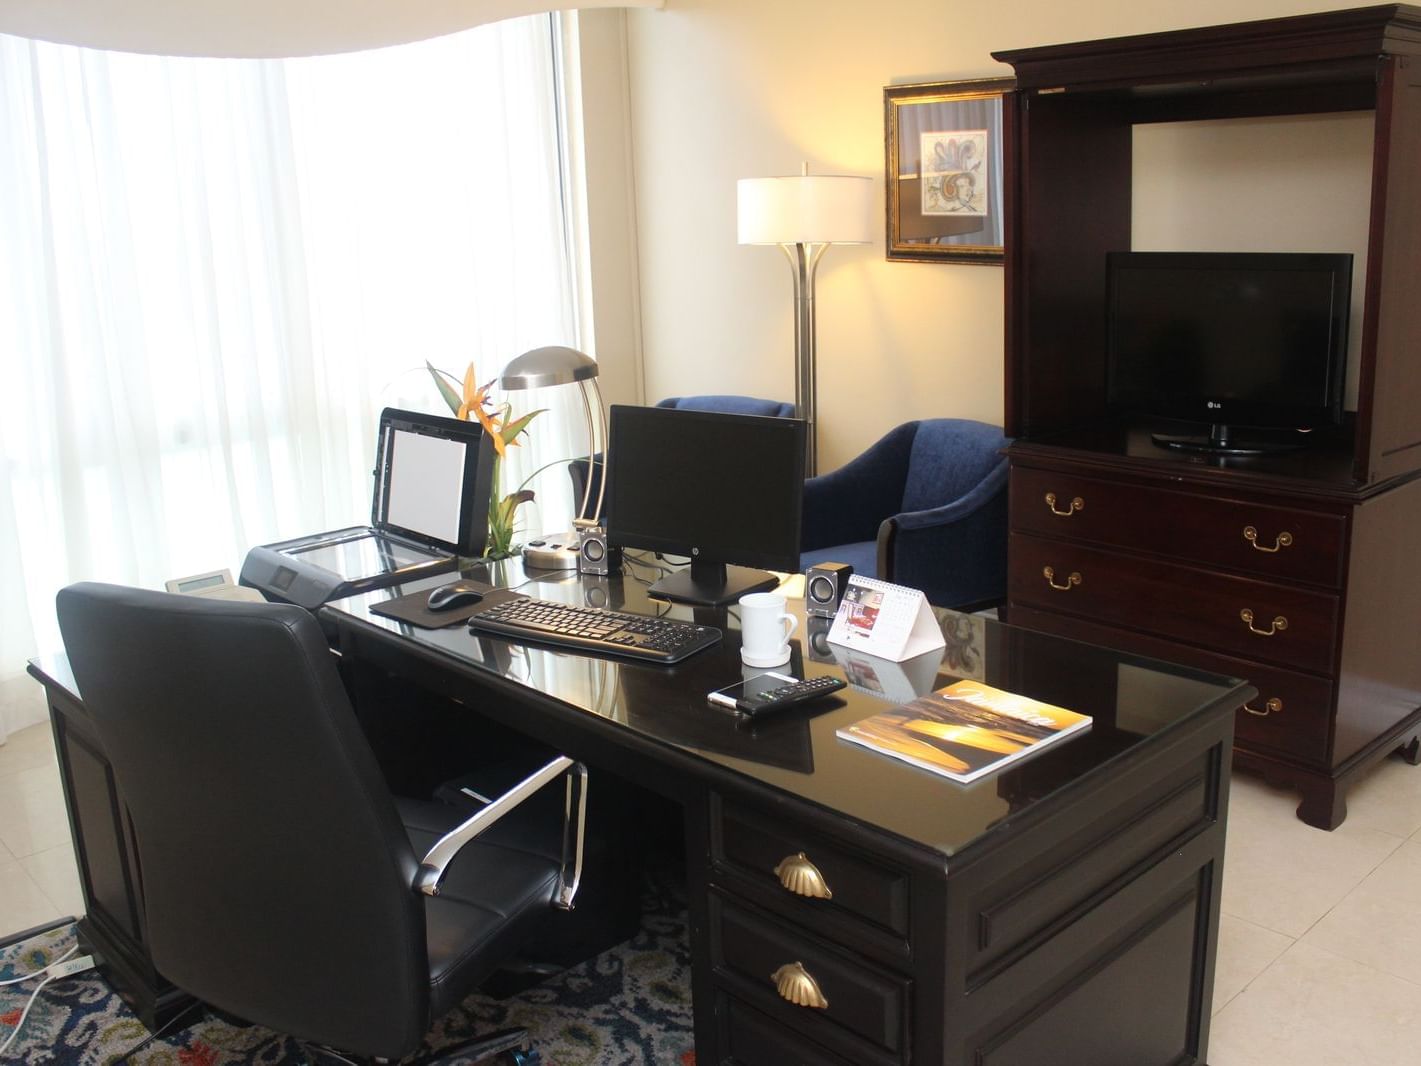 Working desk in Executive Office Suite at Courtleigh Hotel